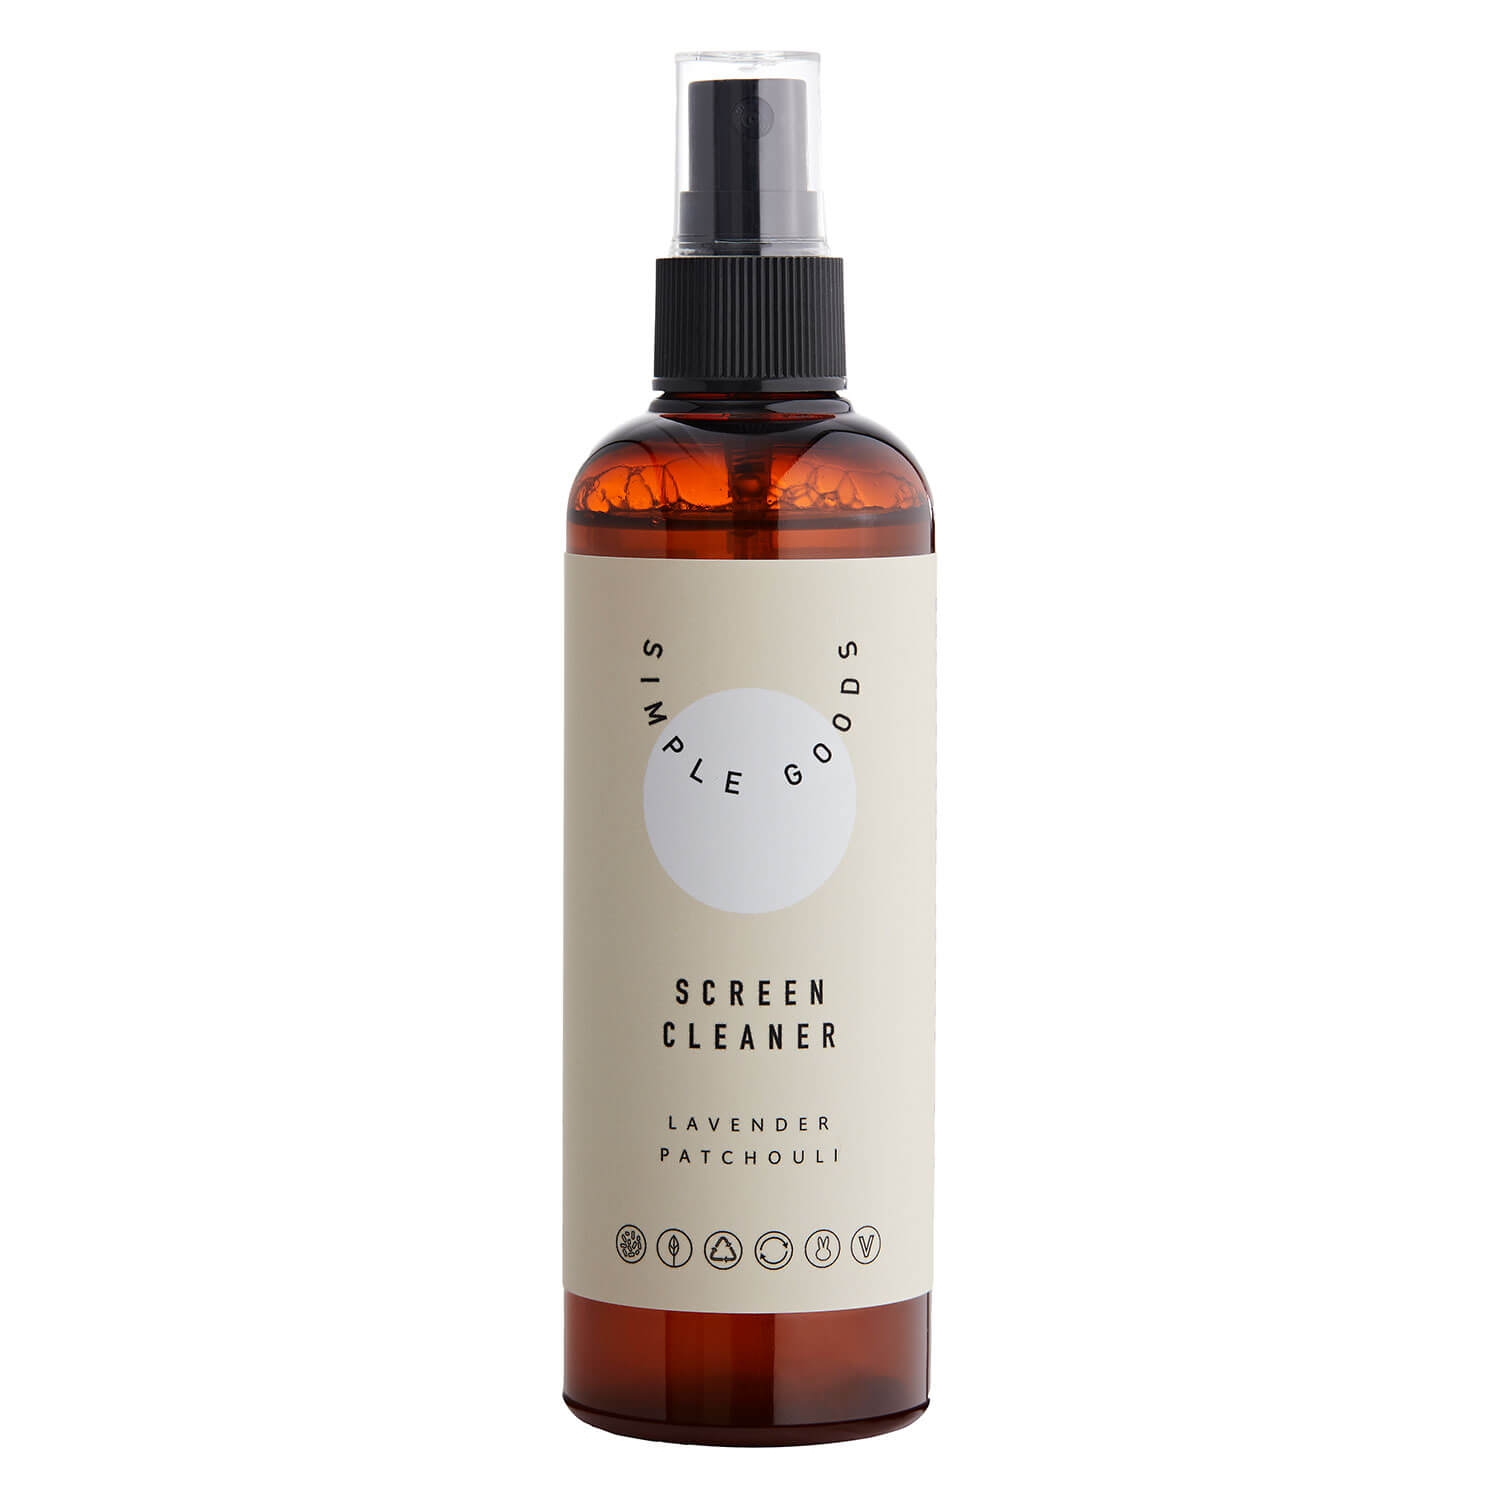 Product image from SIMPLE GOODS - Screen Cleaner Lavender, Patchouli